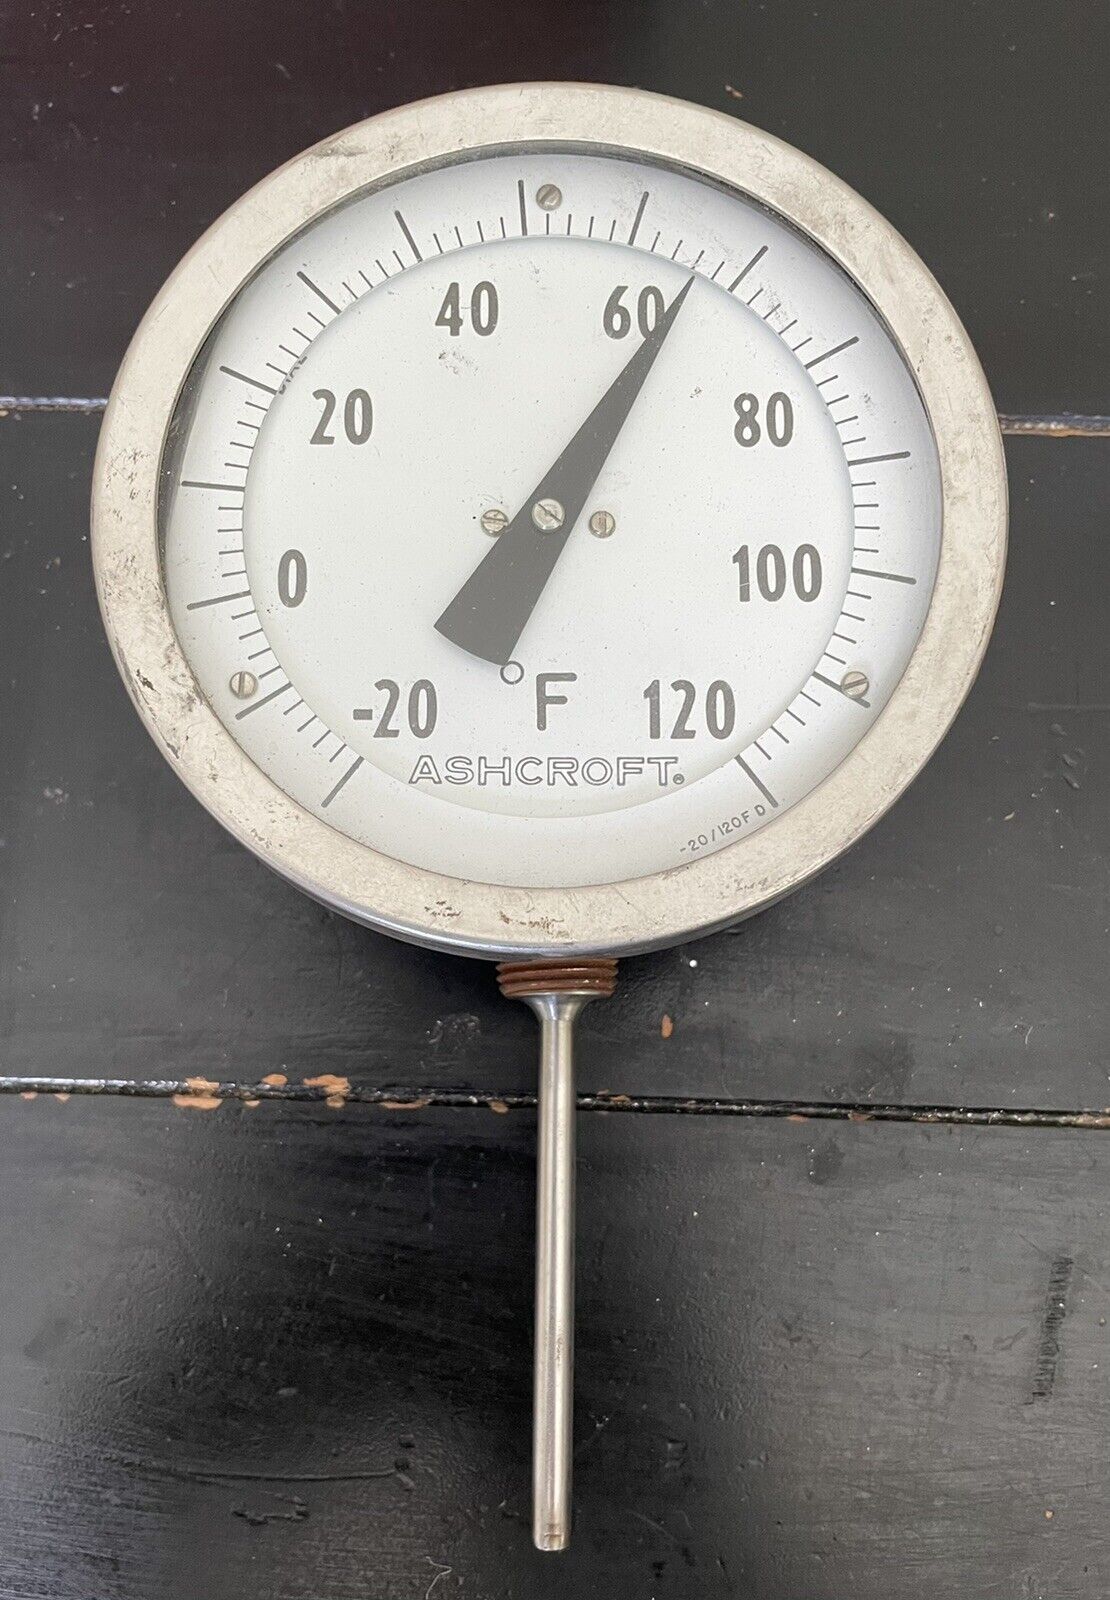 Ashcroft Germany-20/+120 F Temperature Meter Gauge Thermometer Patent No 2925734